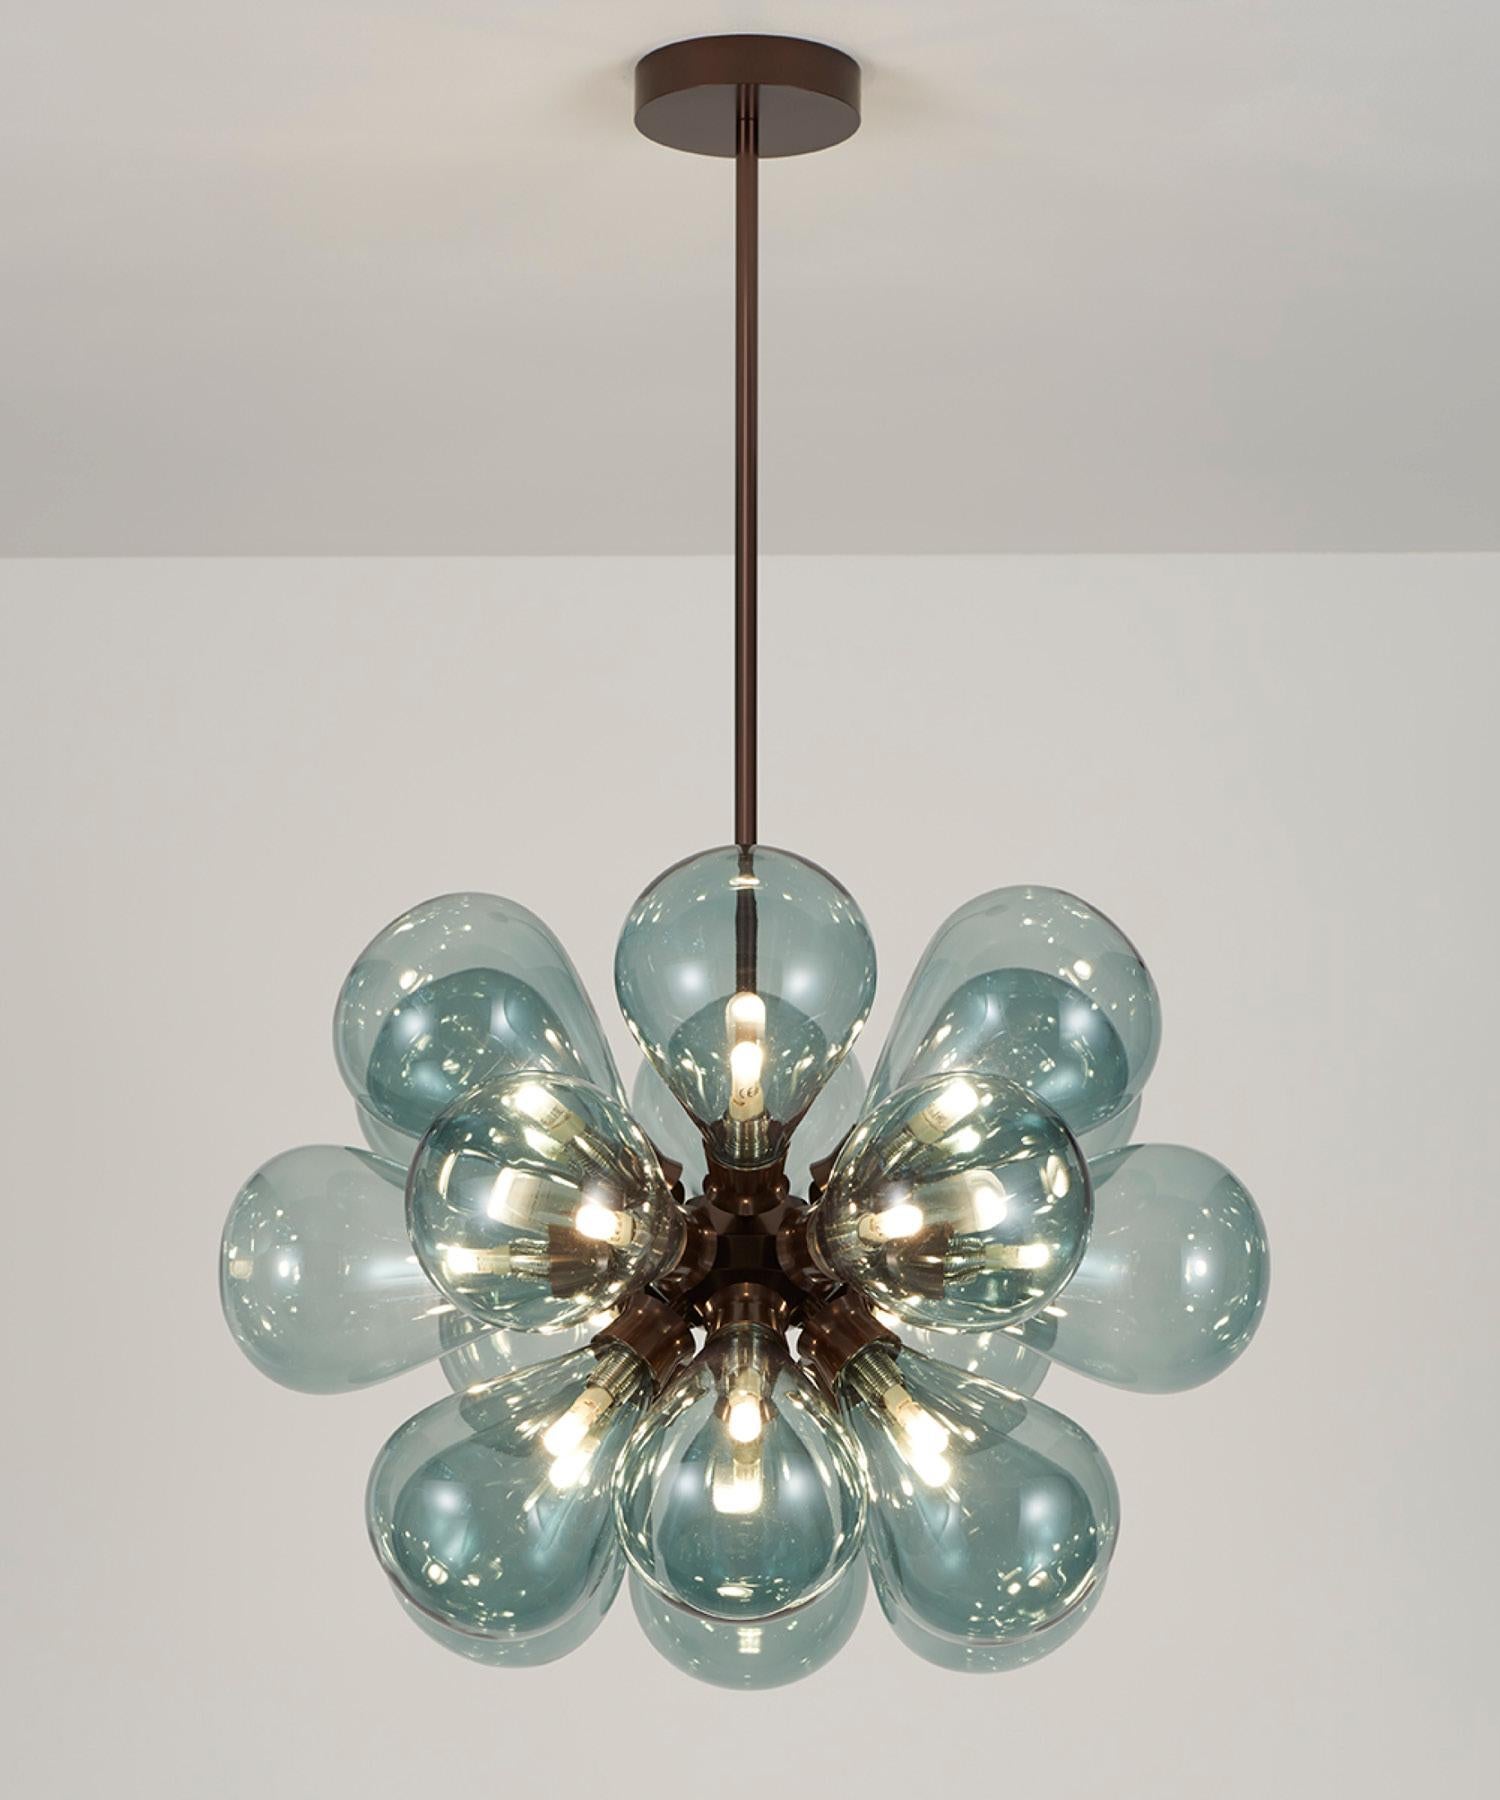 Anodized Cintola Maxi Pendant in Satin Gold with 18 Handblown Smoke Grey Glass Globes For Sale